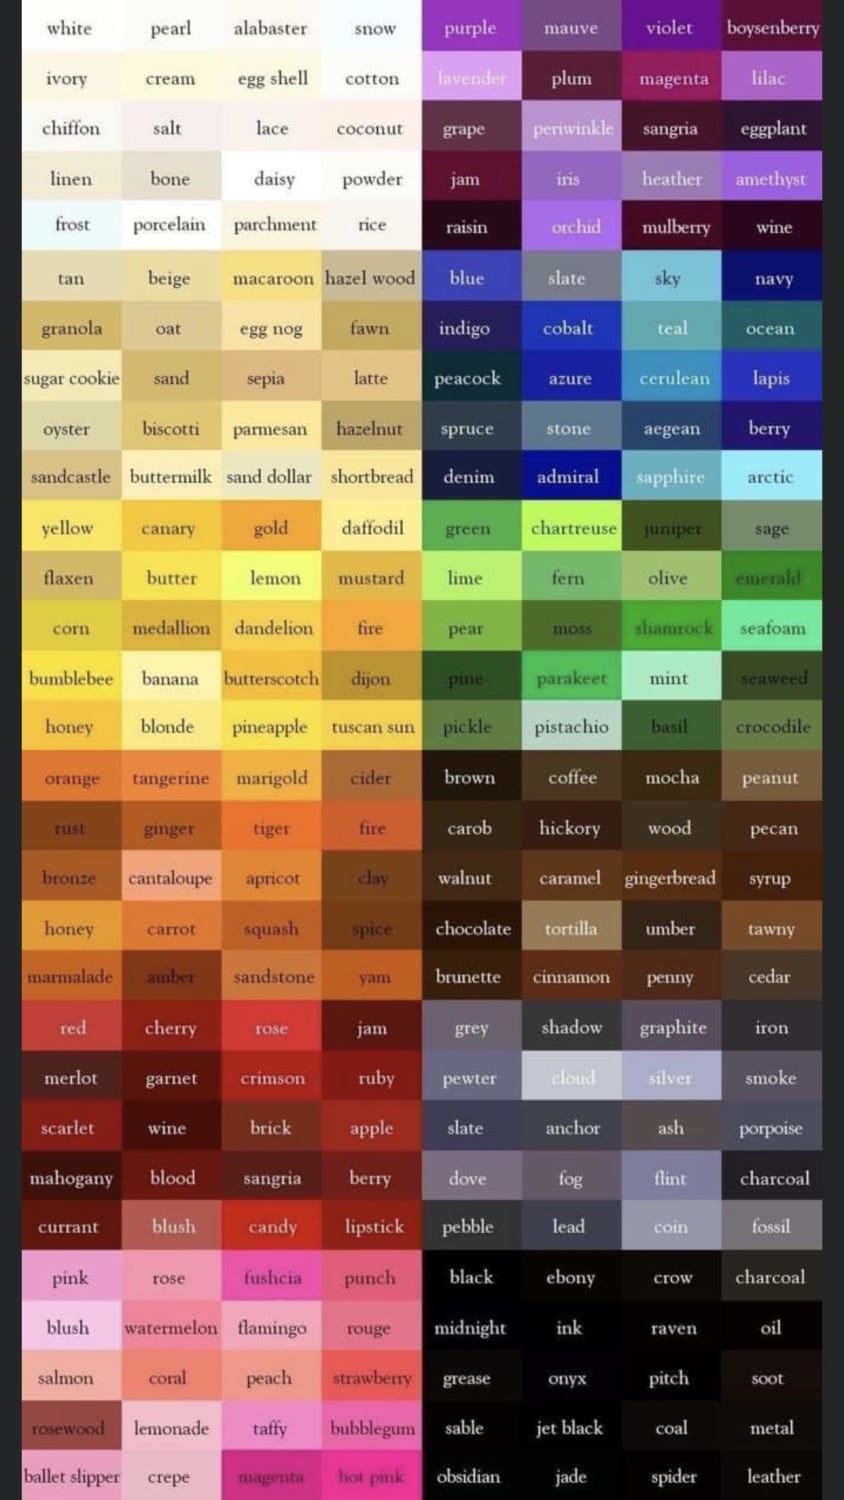 A cool guide to colors